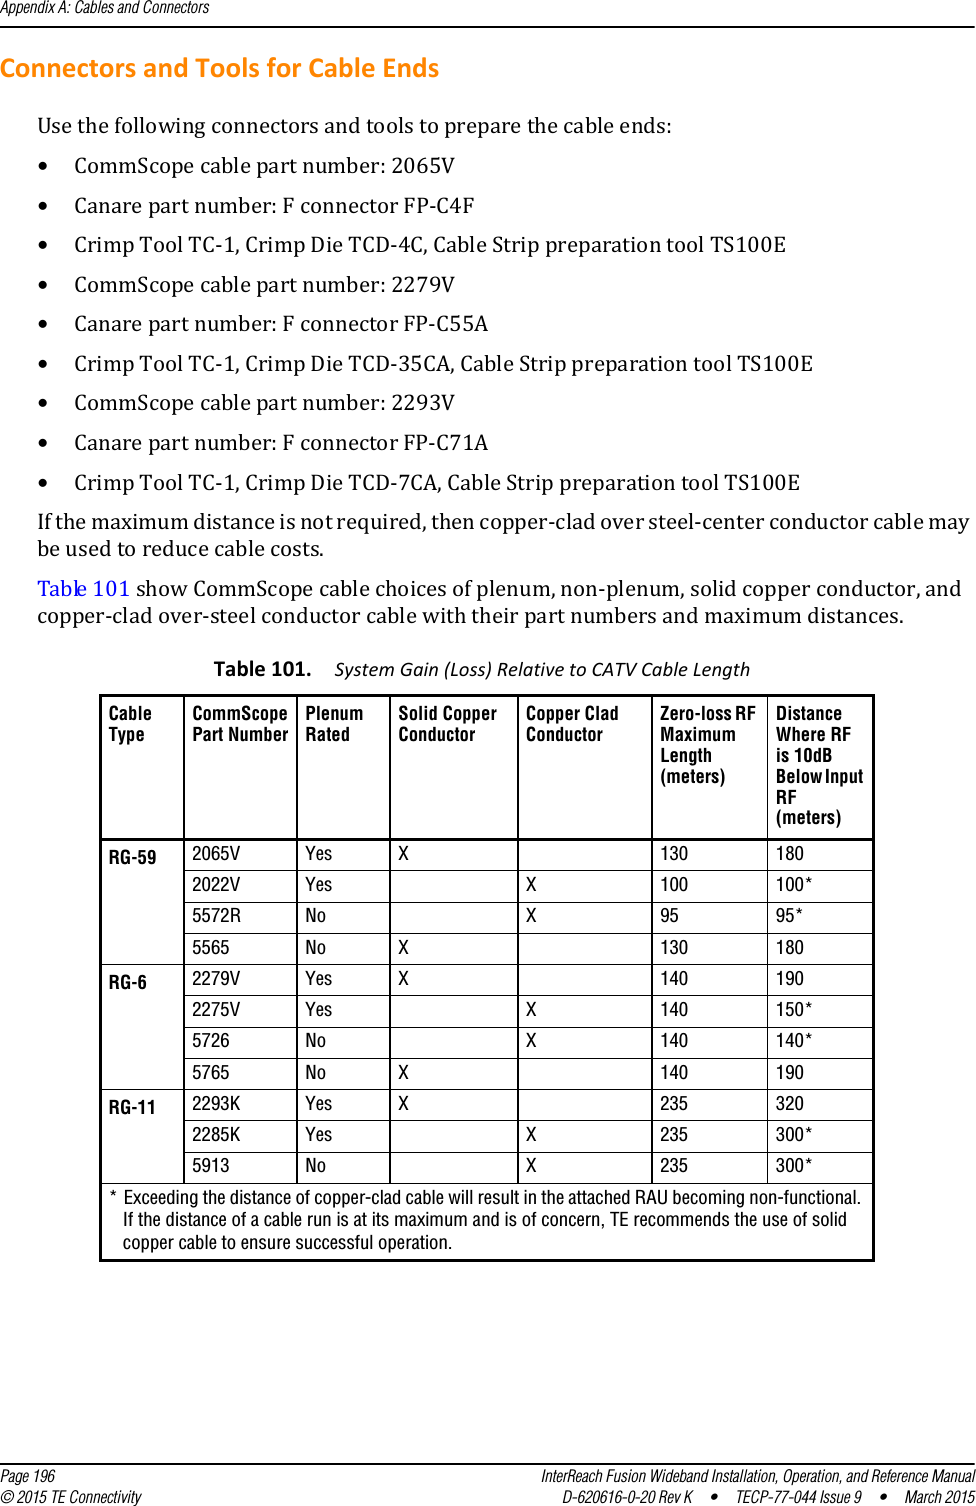 Appendix A: Cables and Connectors  Page 196 InterReach Fusion Wideband Installation, Operation, and Reference Manual© 2015 TE Connectivity D-620616-0-20 Rev K  •  TECP-77-044 Issue 9  •  March 2015Connectors and Tools for Cable EndsUse the following connectors and tools to prepare the cable ends:•CommScope cable part number: 2065V•Canare part number: F connector FP-C4F•Crimp Tool TC-1, Crimp Die TCD-4C, Cable Strip preparation tool TS100E•CommScope cable part number: 2279V•Canare part number: F connector FP-C55A•Crimp Tool TC-1, Crimp Die TCD-35CA, Cable Strip preparation tool TS100E•CommScope cable part number: 2293V•Canare part number: F connector FP-C71A•Crimp Tool TC-1, Crimp Die TCD-7CA, Cable Strip preparation tool TS100EIf the maximum distance is not required, then copper-clad over steel-center conductor cable may be used to reduce cable costs.Table 101 show CommScope cable choices of plenum, non-plenum, solid copper conductor, and copper-clad over-steel conductor cable with their part numbers and maximum distances.Table 101. System Gain (Loss) Relative to CATV Cable Length  Cable TypeCommScope Part NumberPlenum RatedSolid Copper ConductorCopper Clad ConductorZero-loss RF Maximum Length (meters)Distance Where RF is 10dB Below Input RF (meters)RG-59 2065V Yes X 130 1802022V Yes X 100 100*5572R No X 95 95*5565 No X 130 180RG-6 2279V Yes X 140 1902275V Yes X 140 150*5726 No X 140 140*5765 No X 140 190RG-11 2293K Yes X 235 3202285K Yes X 235 300*5913 No X 235 300** Exceeding the distance of copper-clad cable will result in the attached RAU becoming non-functional. If the distance of a cable run is at its maximum and is of concern, TE recommends the use of solid copper cable to ensure successful operation.